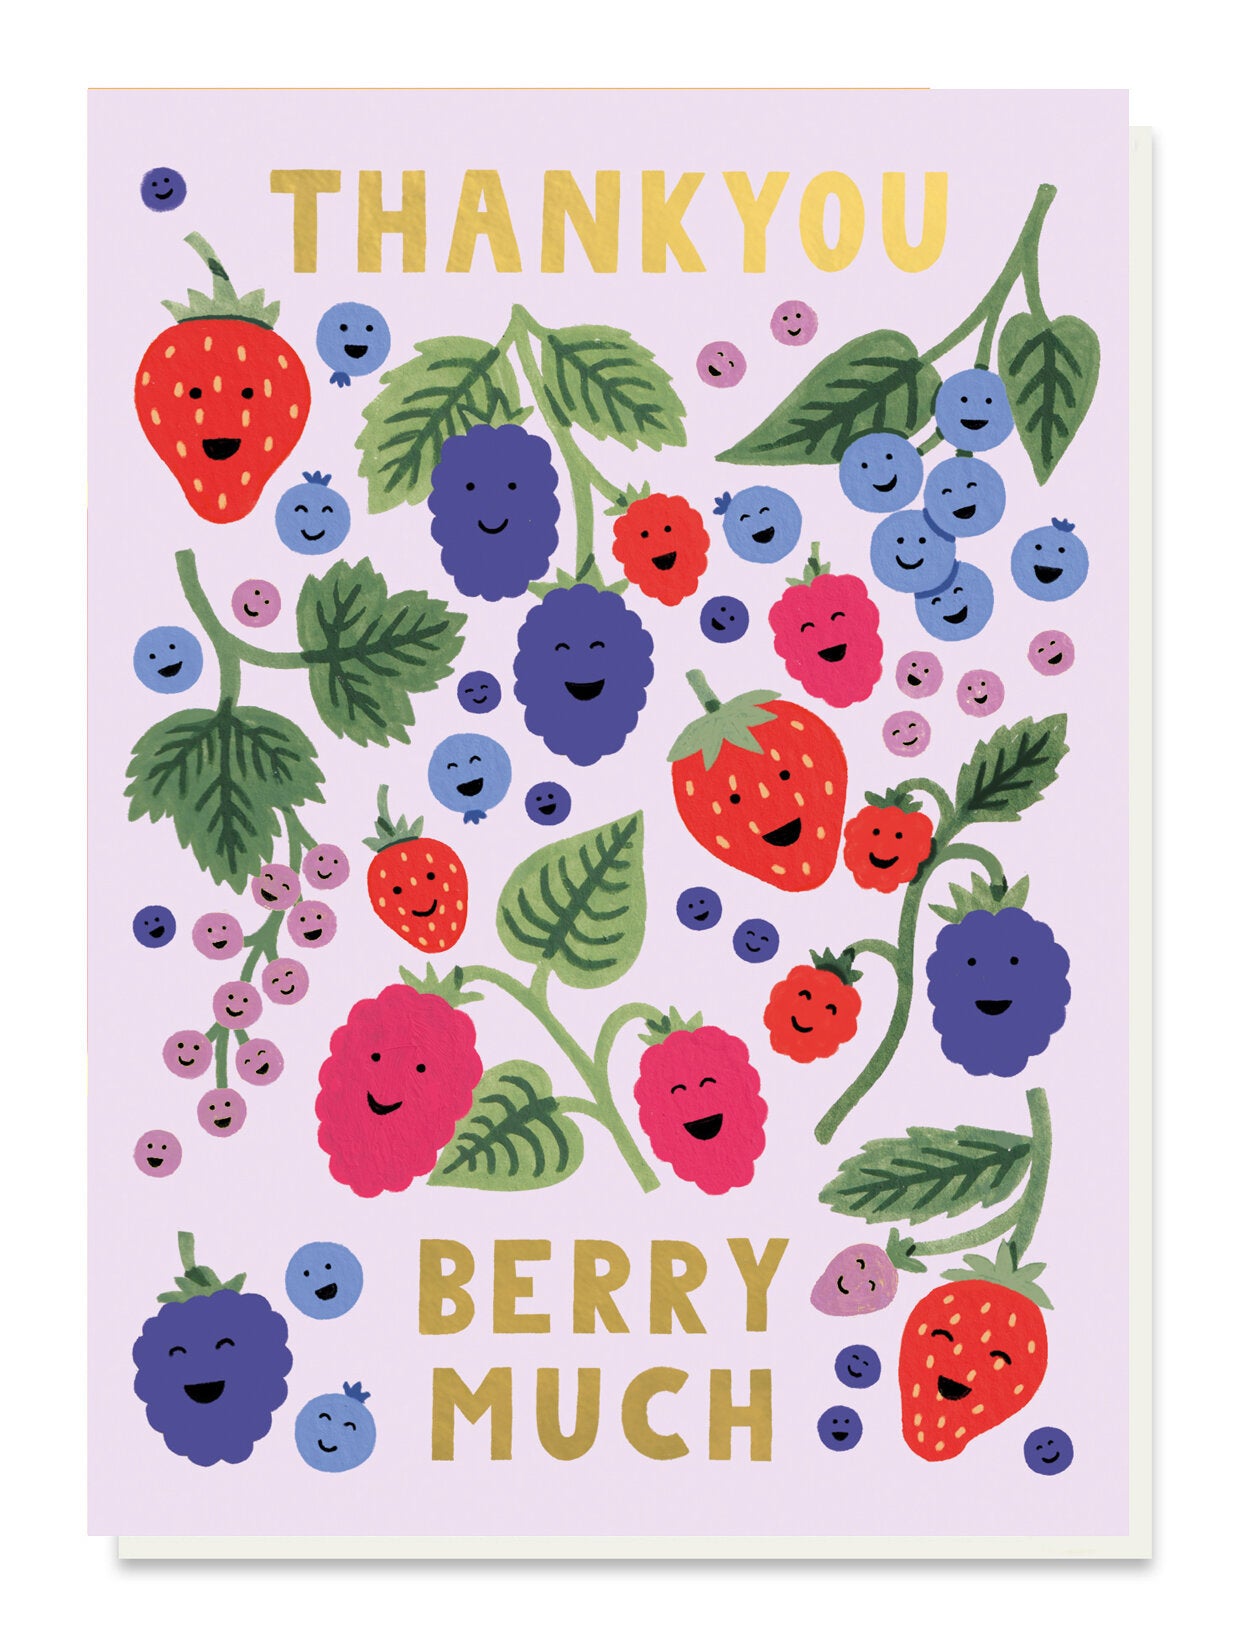 Thank You Berry Much Card